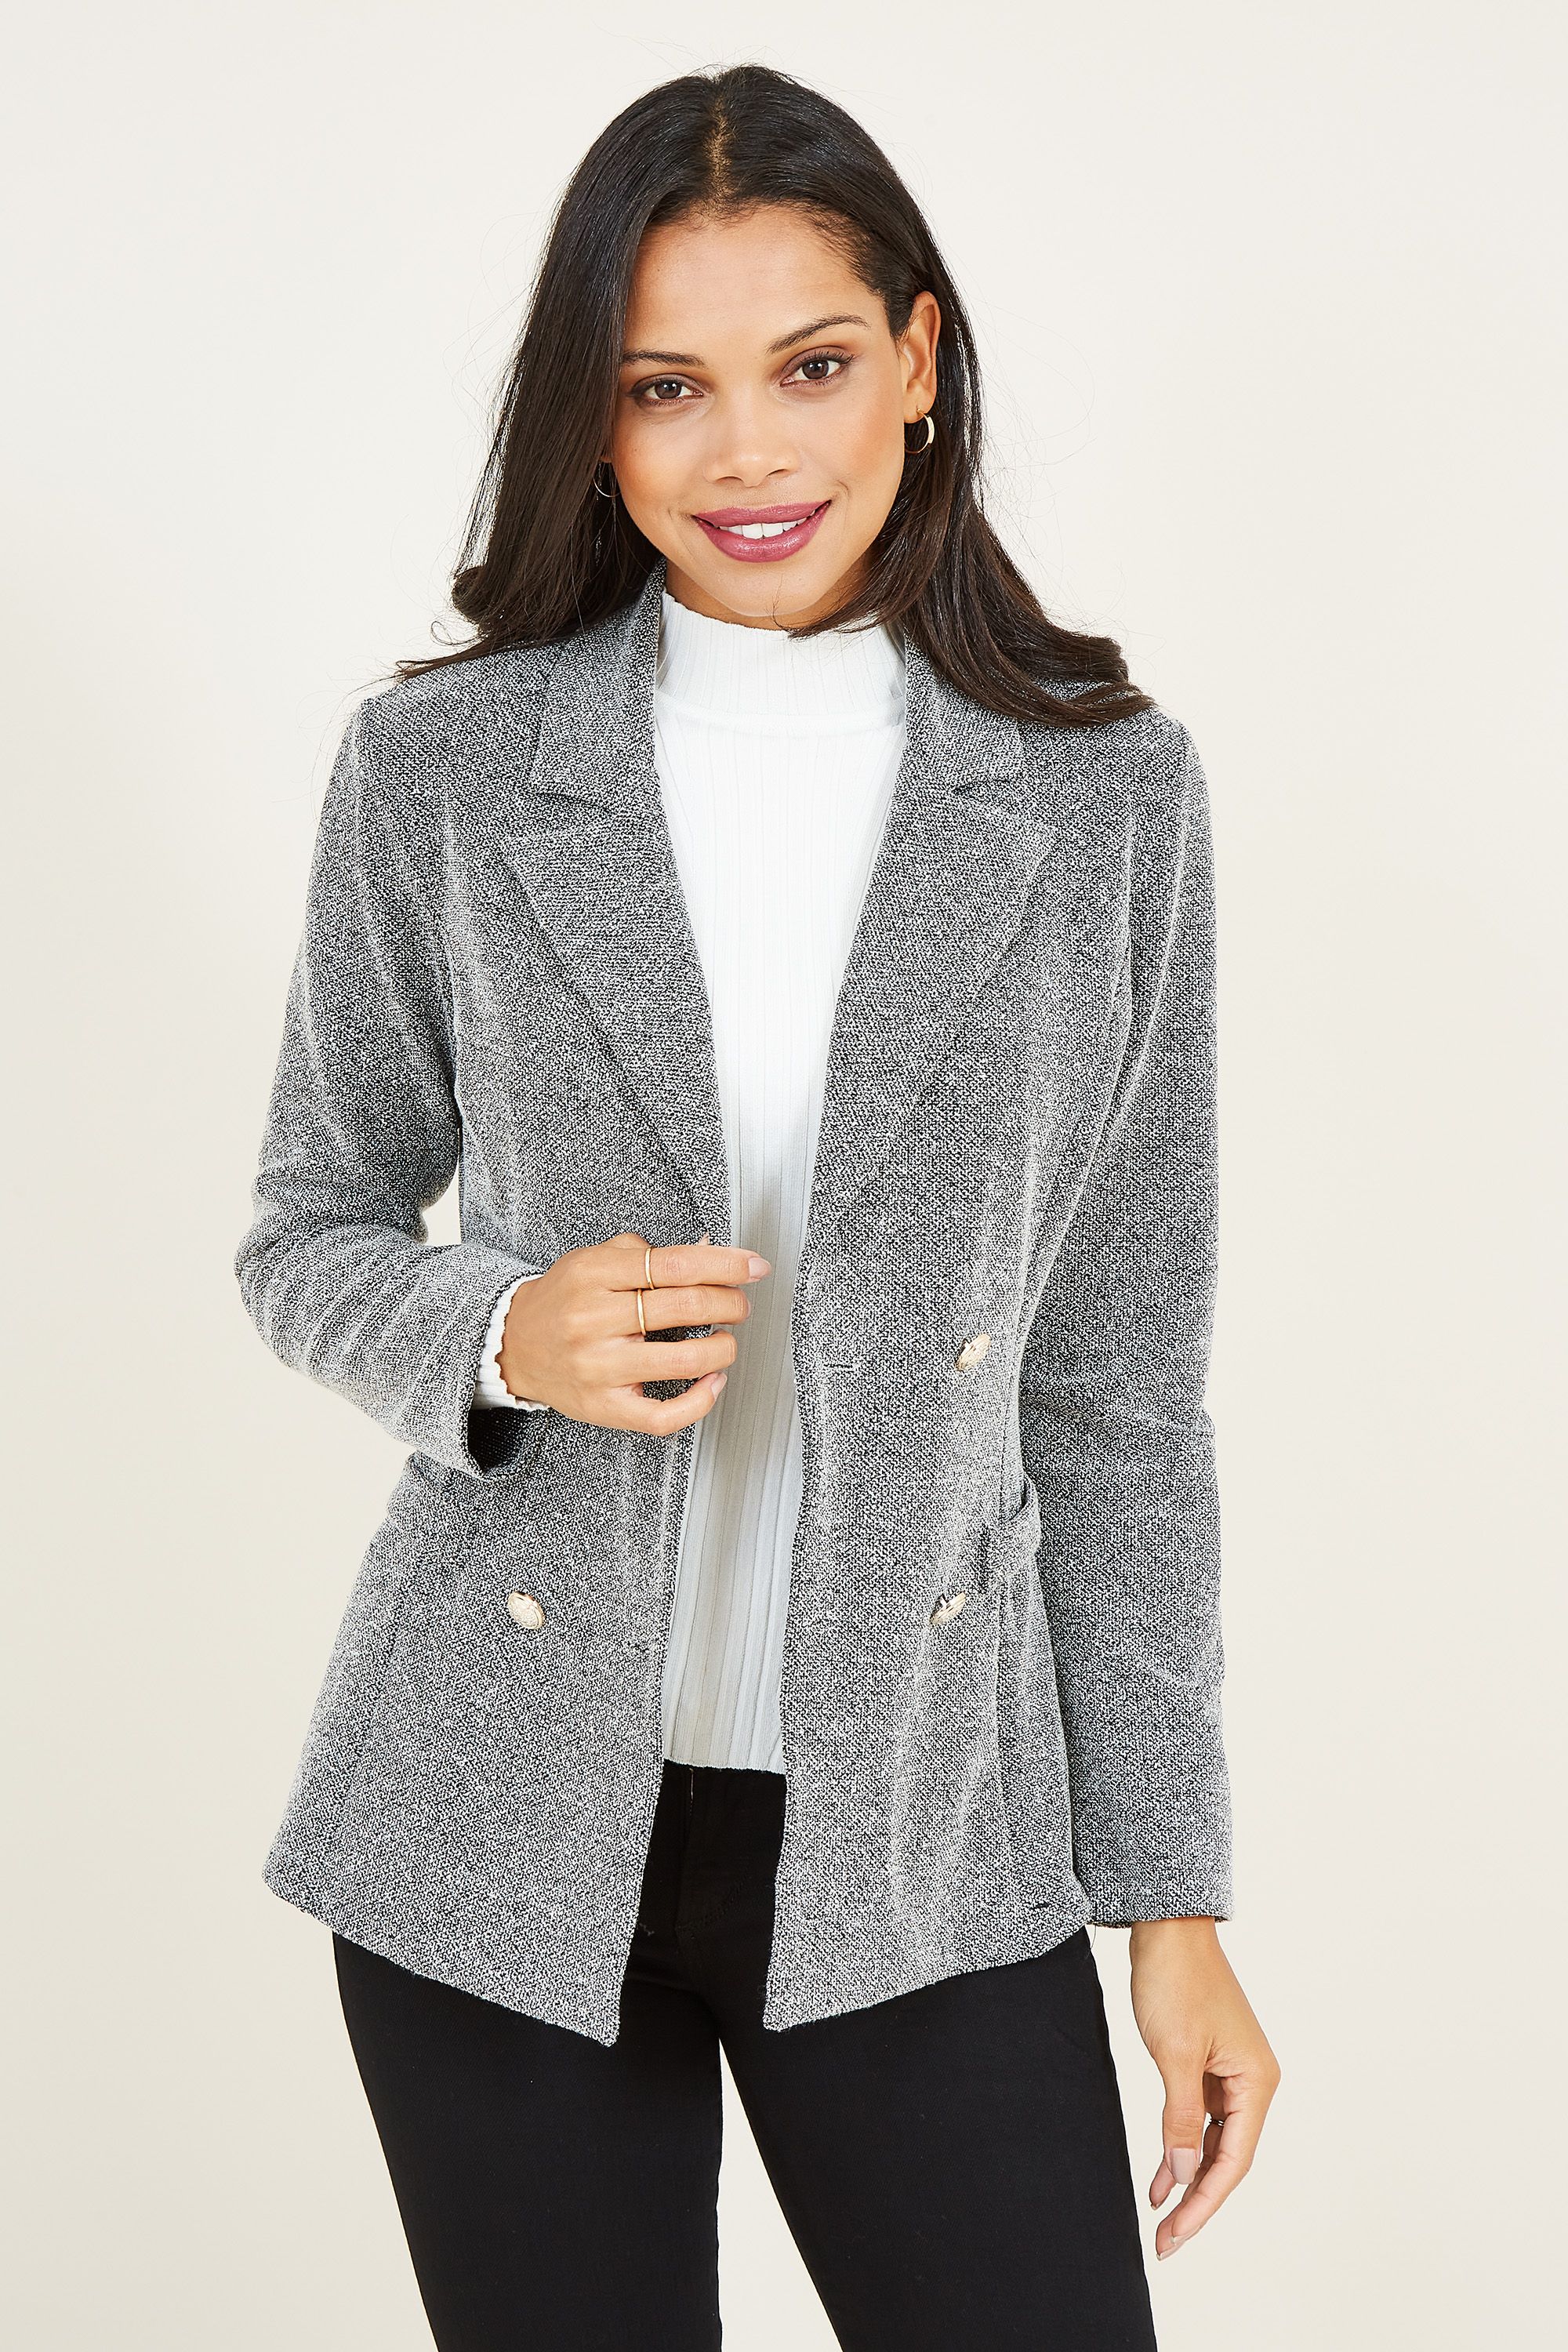 Smarten up your outerwear with this Mela Button Blazer. Featuring a classic shape with long sleeves and a semi-fitted cut, it's styled with a double-breasted front. With pockets on the side for a practical edge, wear over a pair of jeans and a shirt for a work-to-weekend-win.